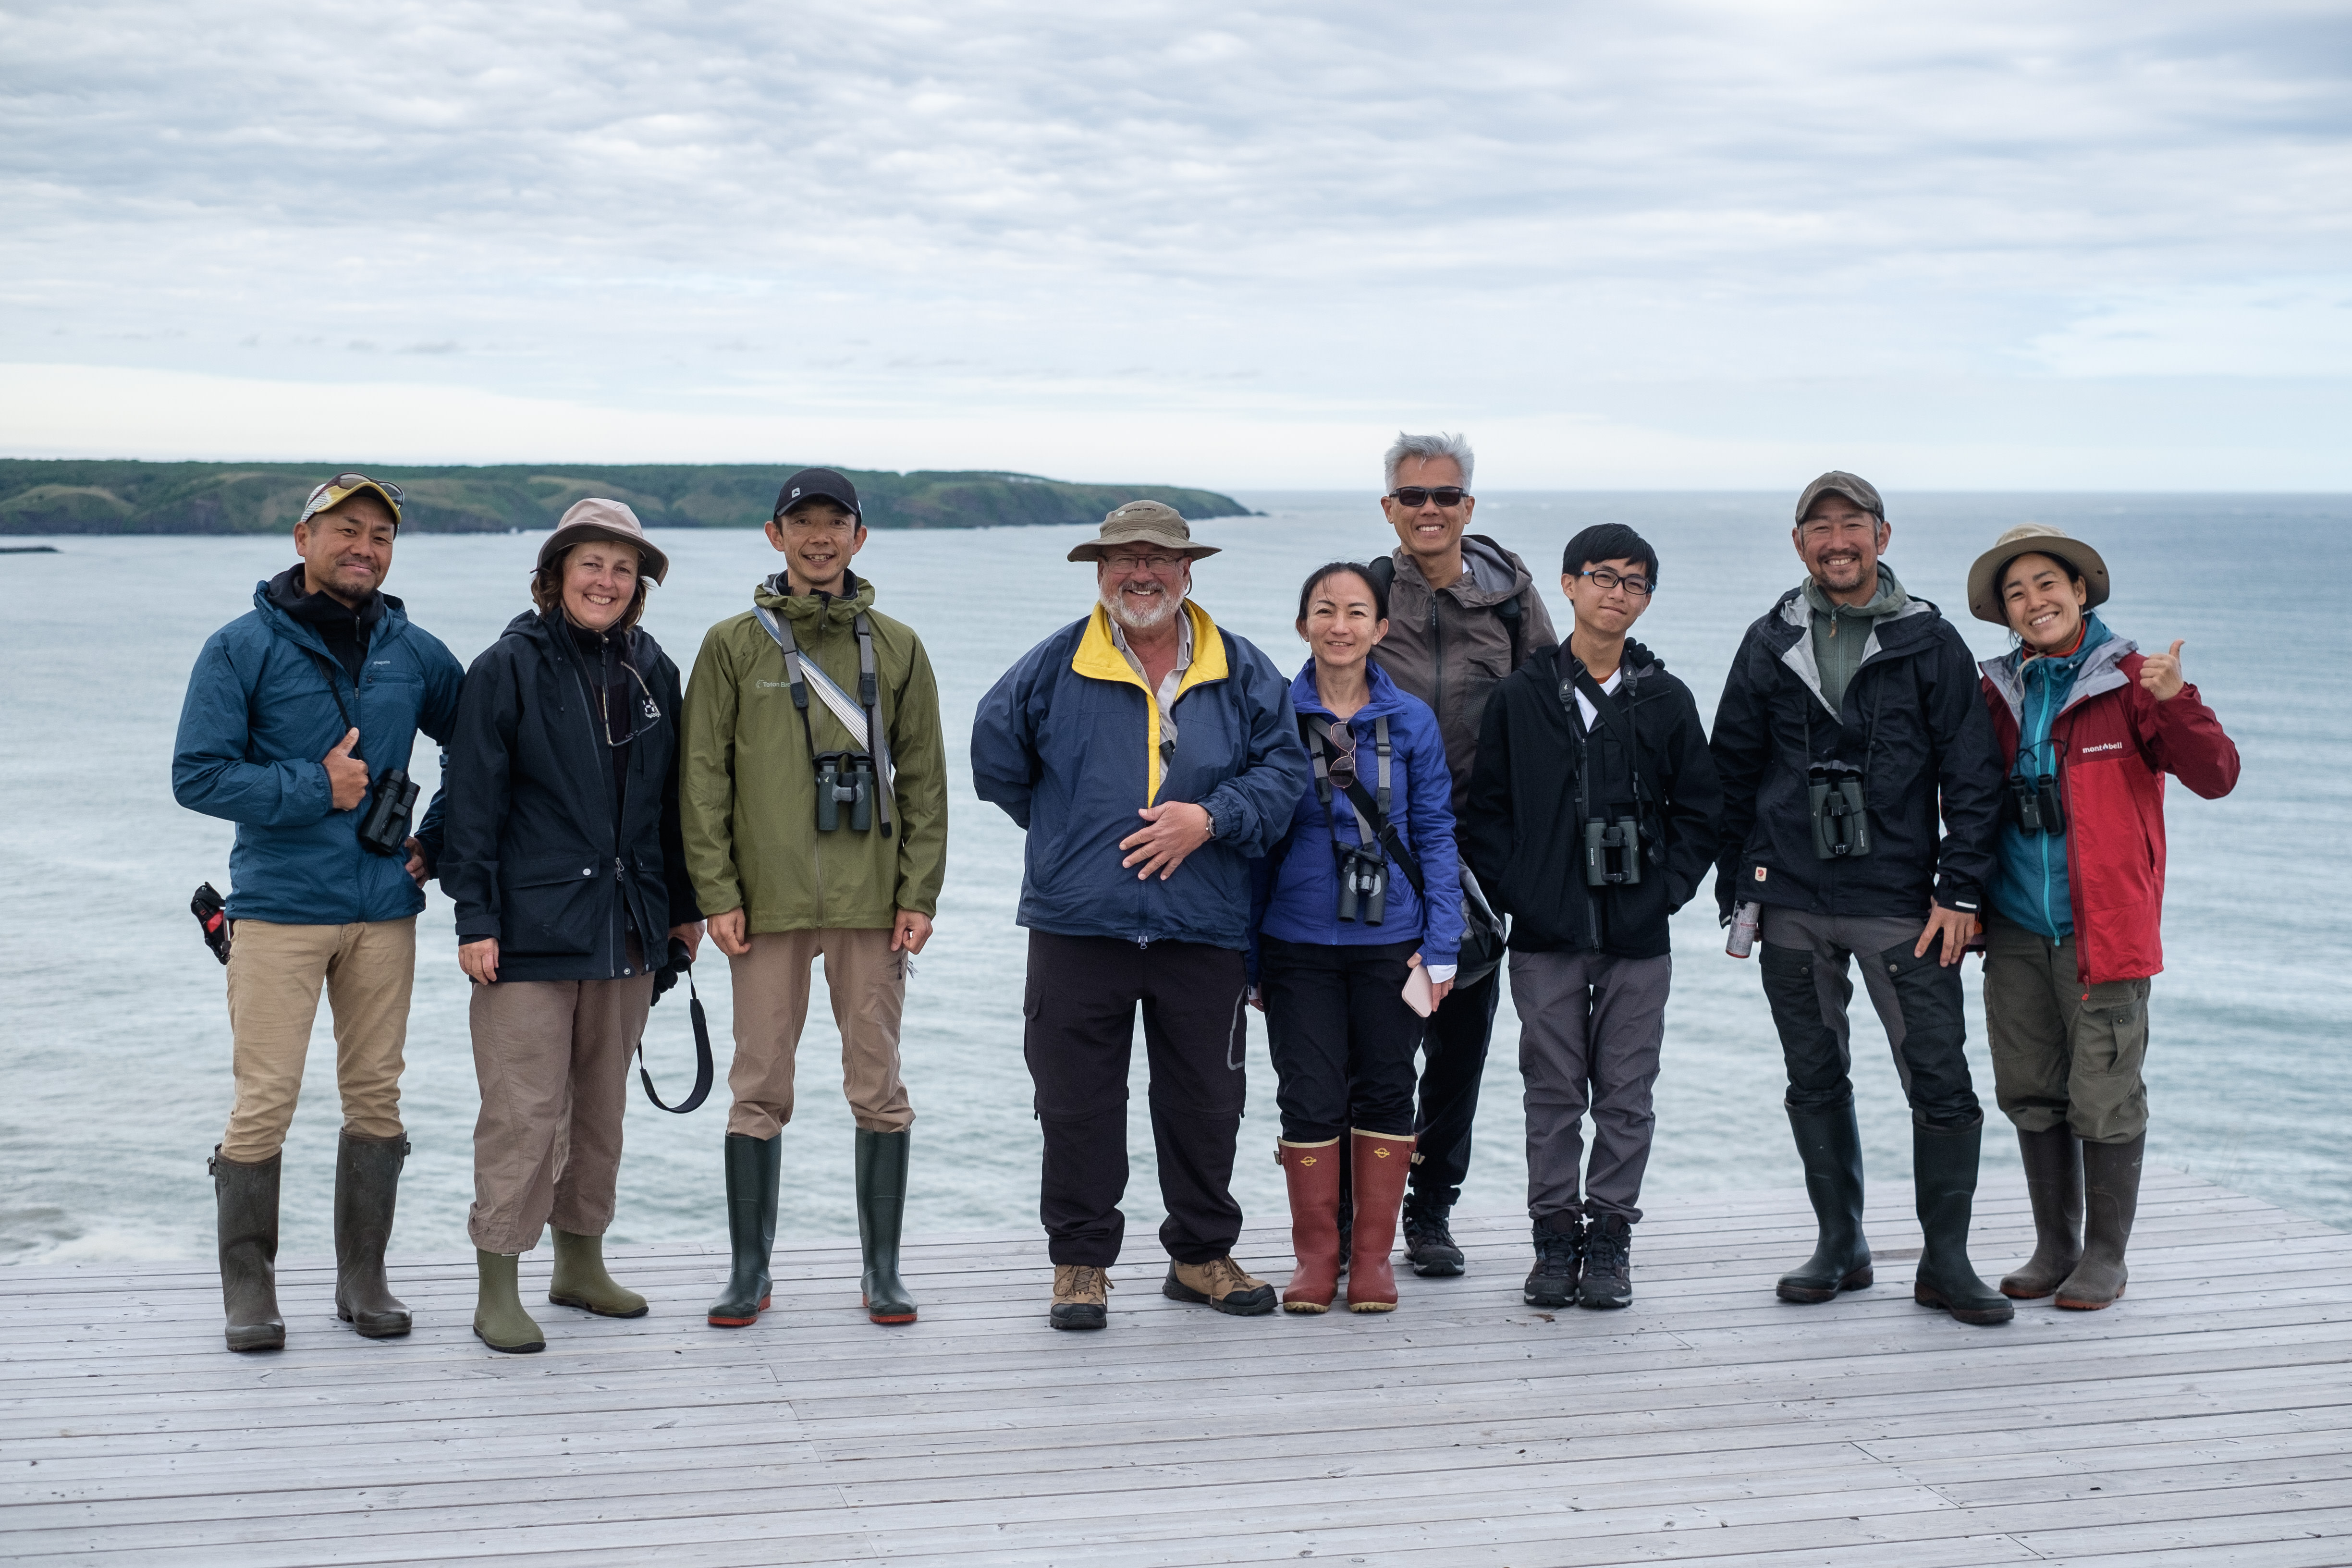 A group of tourists pose for a photo with local guides. The group stands on a wooden deck overlooking a grey sea with a windswept headland in the distance.